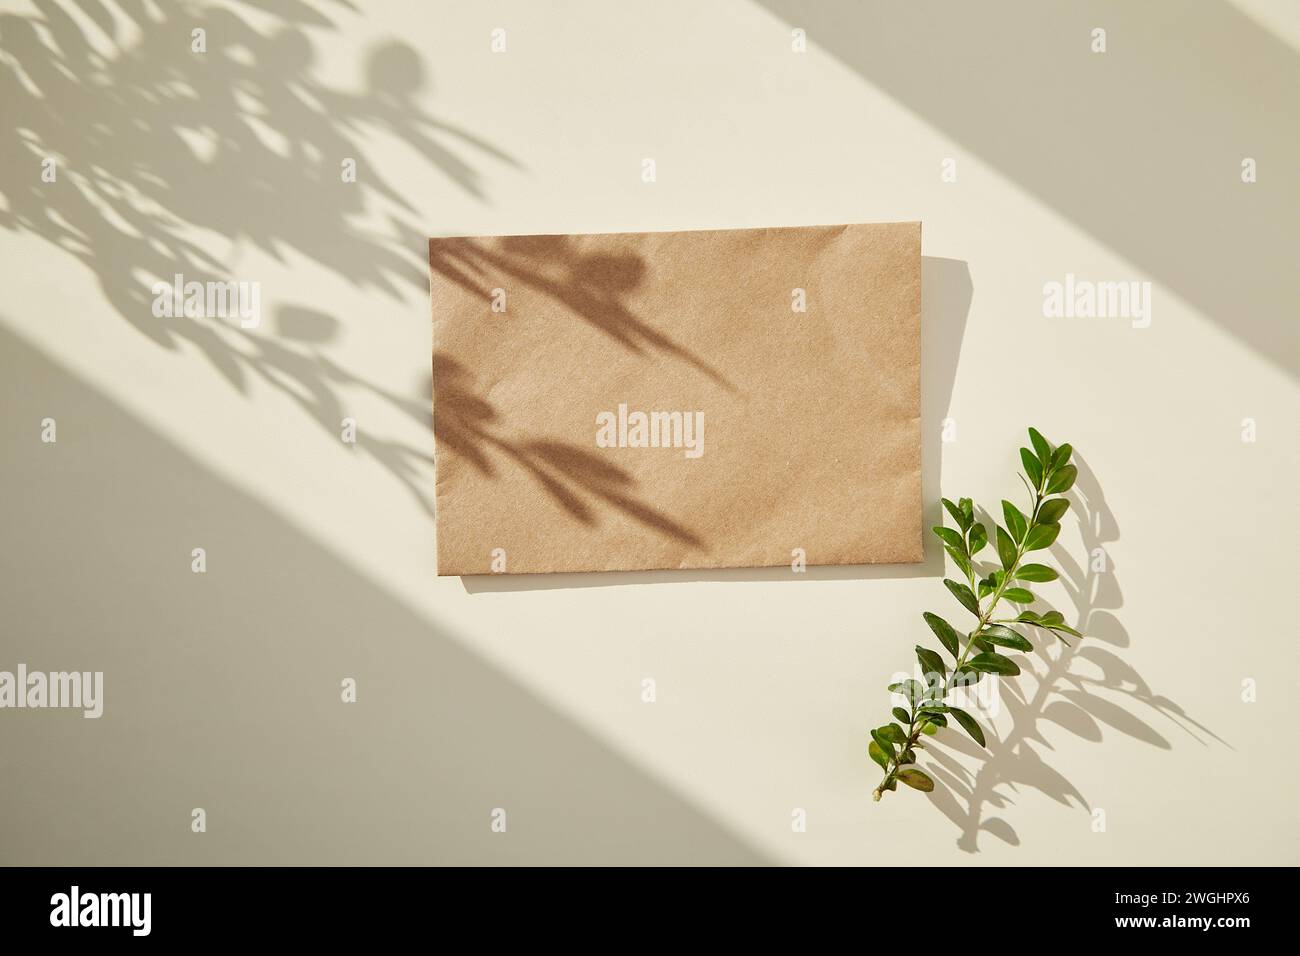 Craft paper envelope mock up under sunny shadows. Copy space. Stock Photo